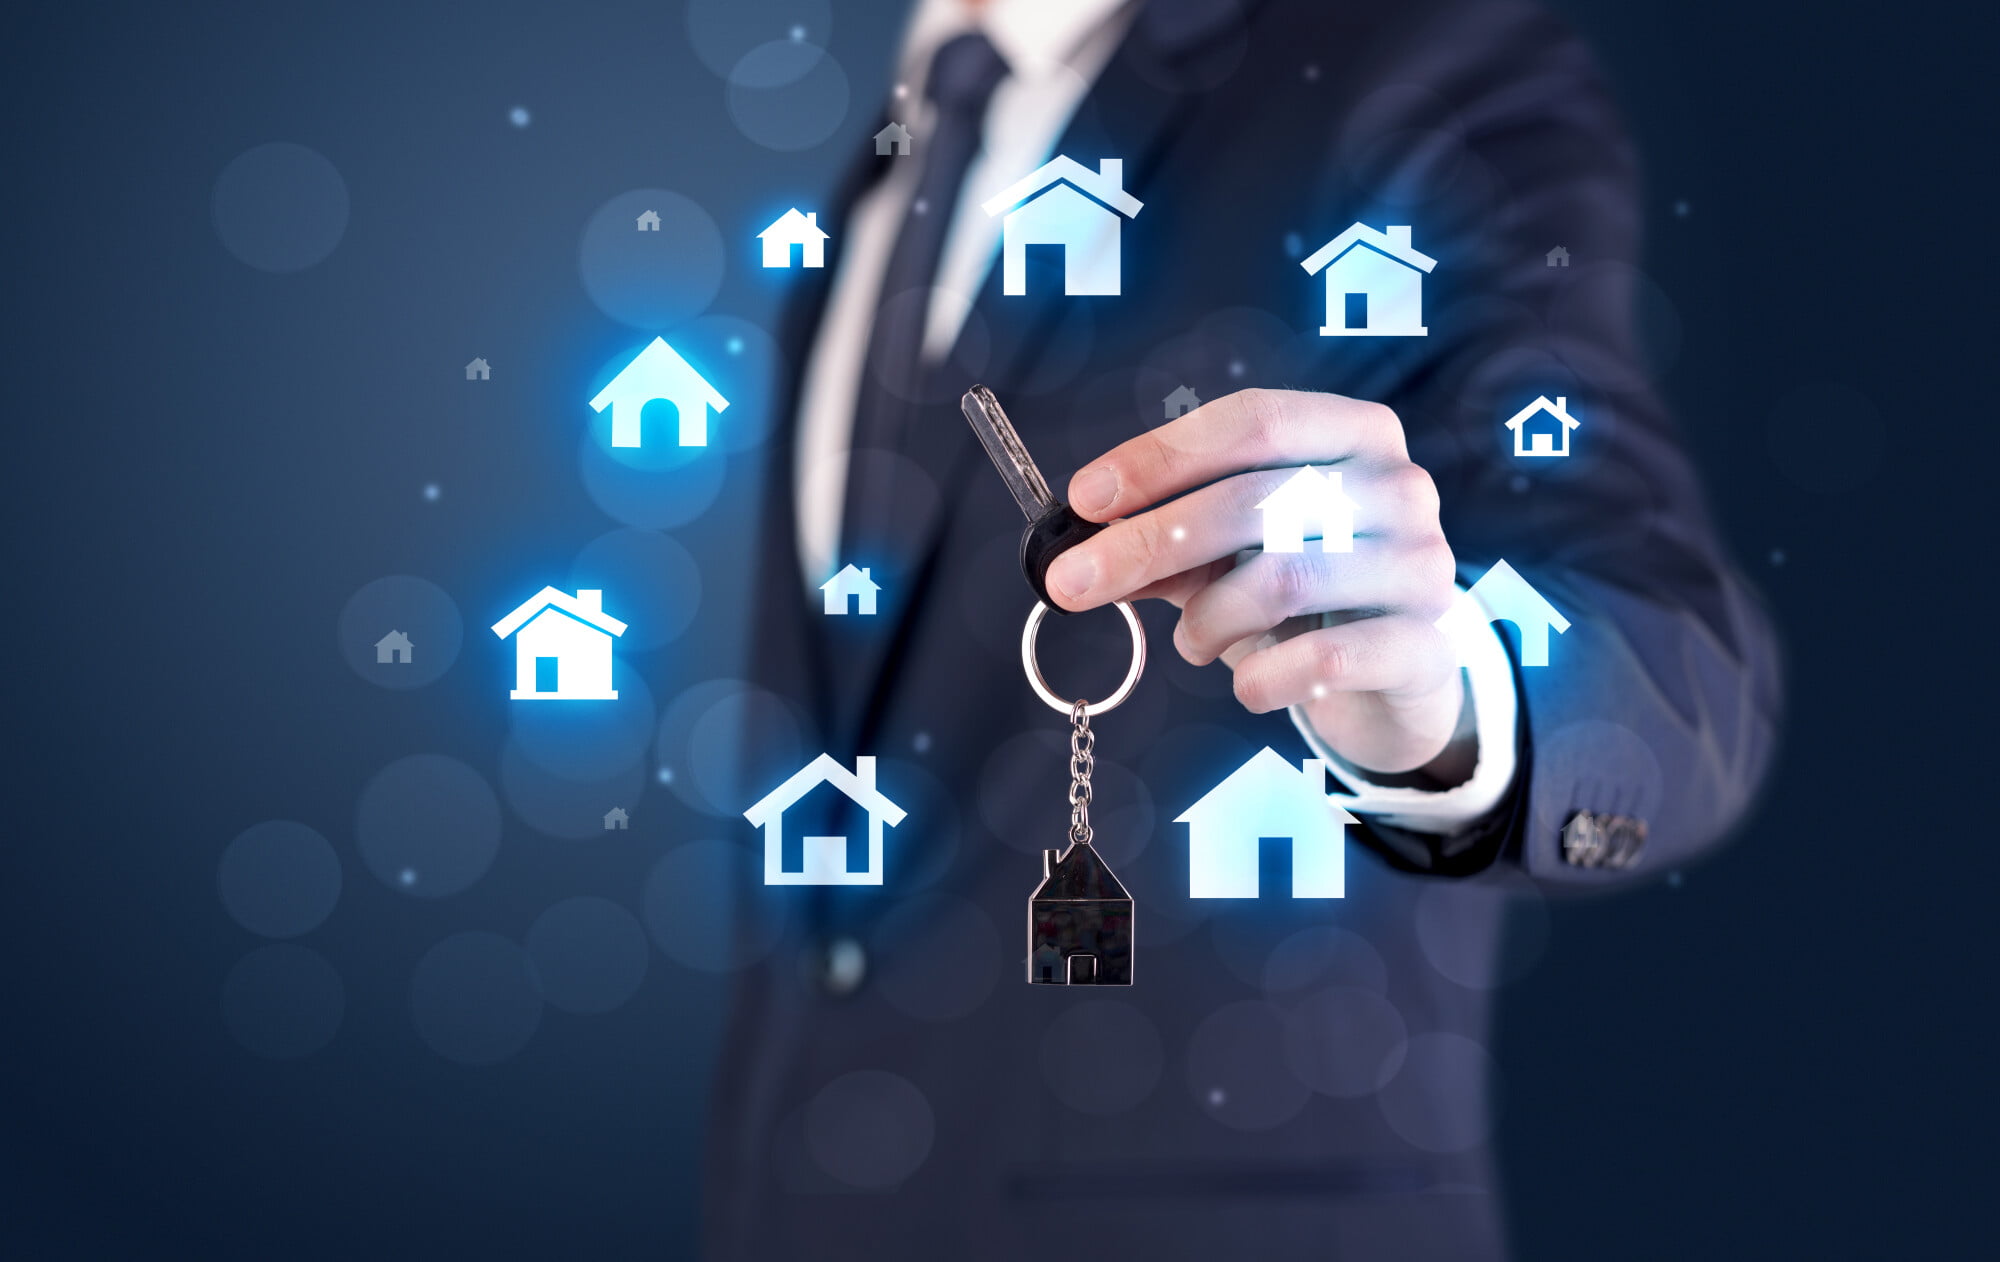 If you're looking for an investment property management company, keep reading as we look at how to get the most from the property managers you hire.